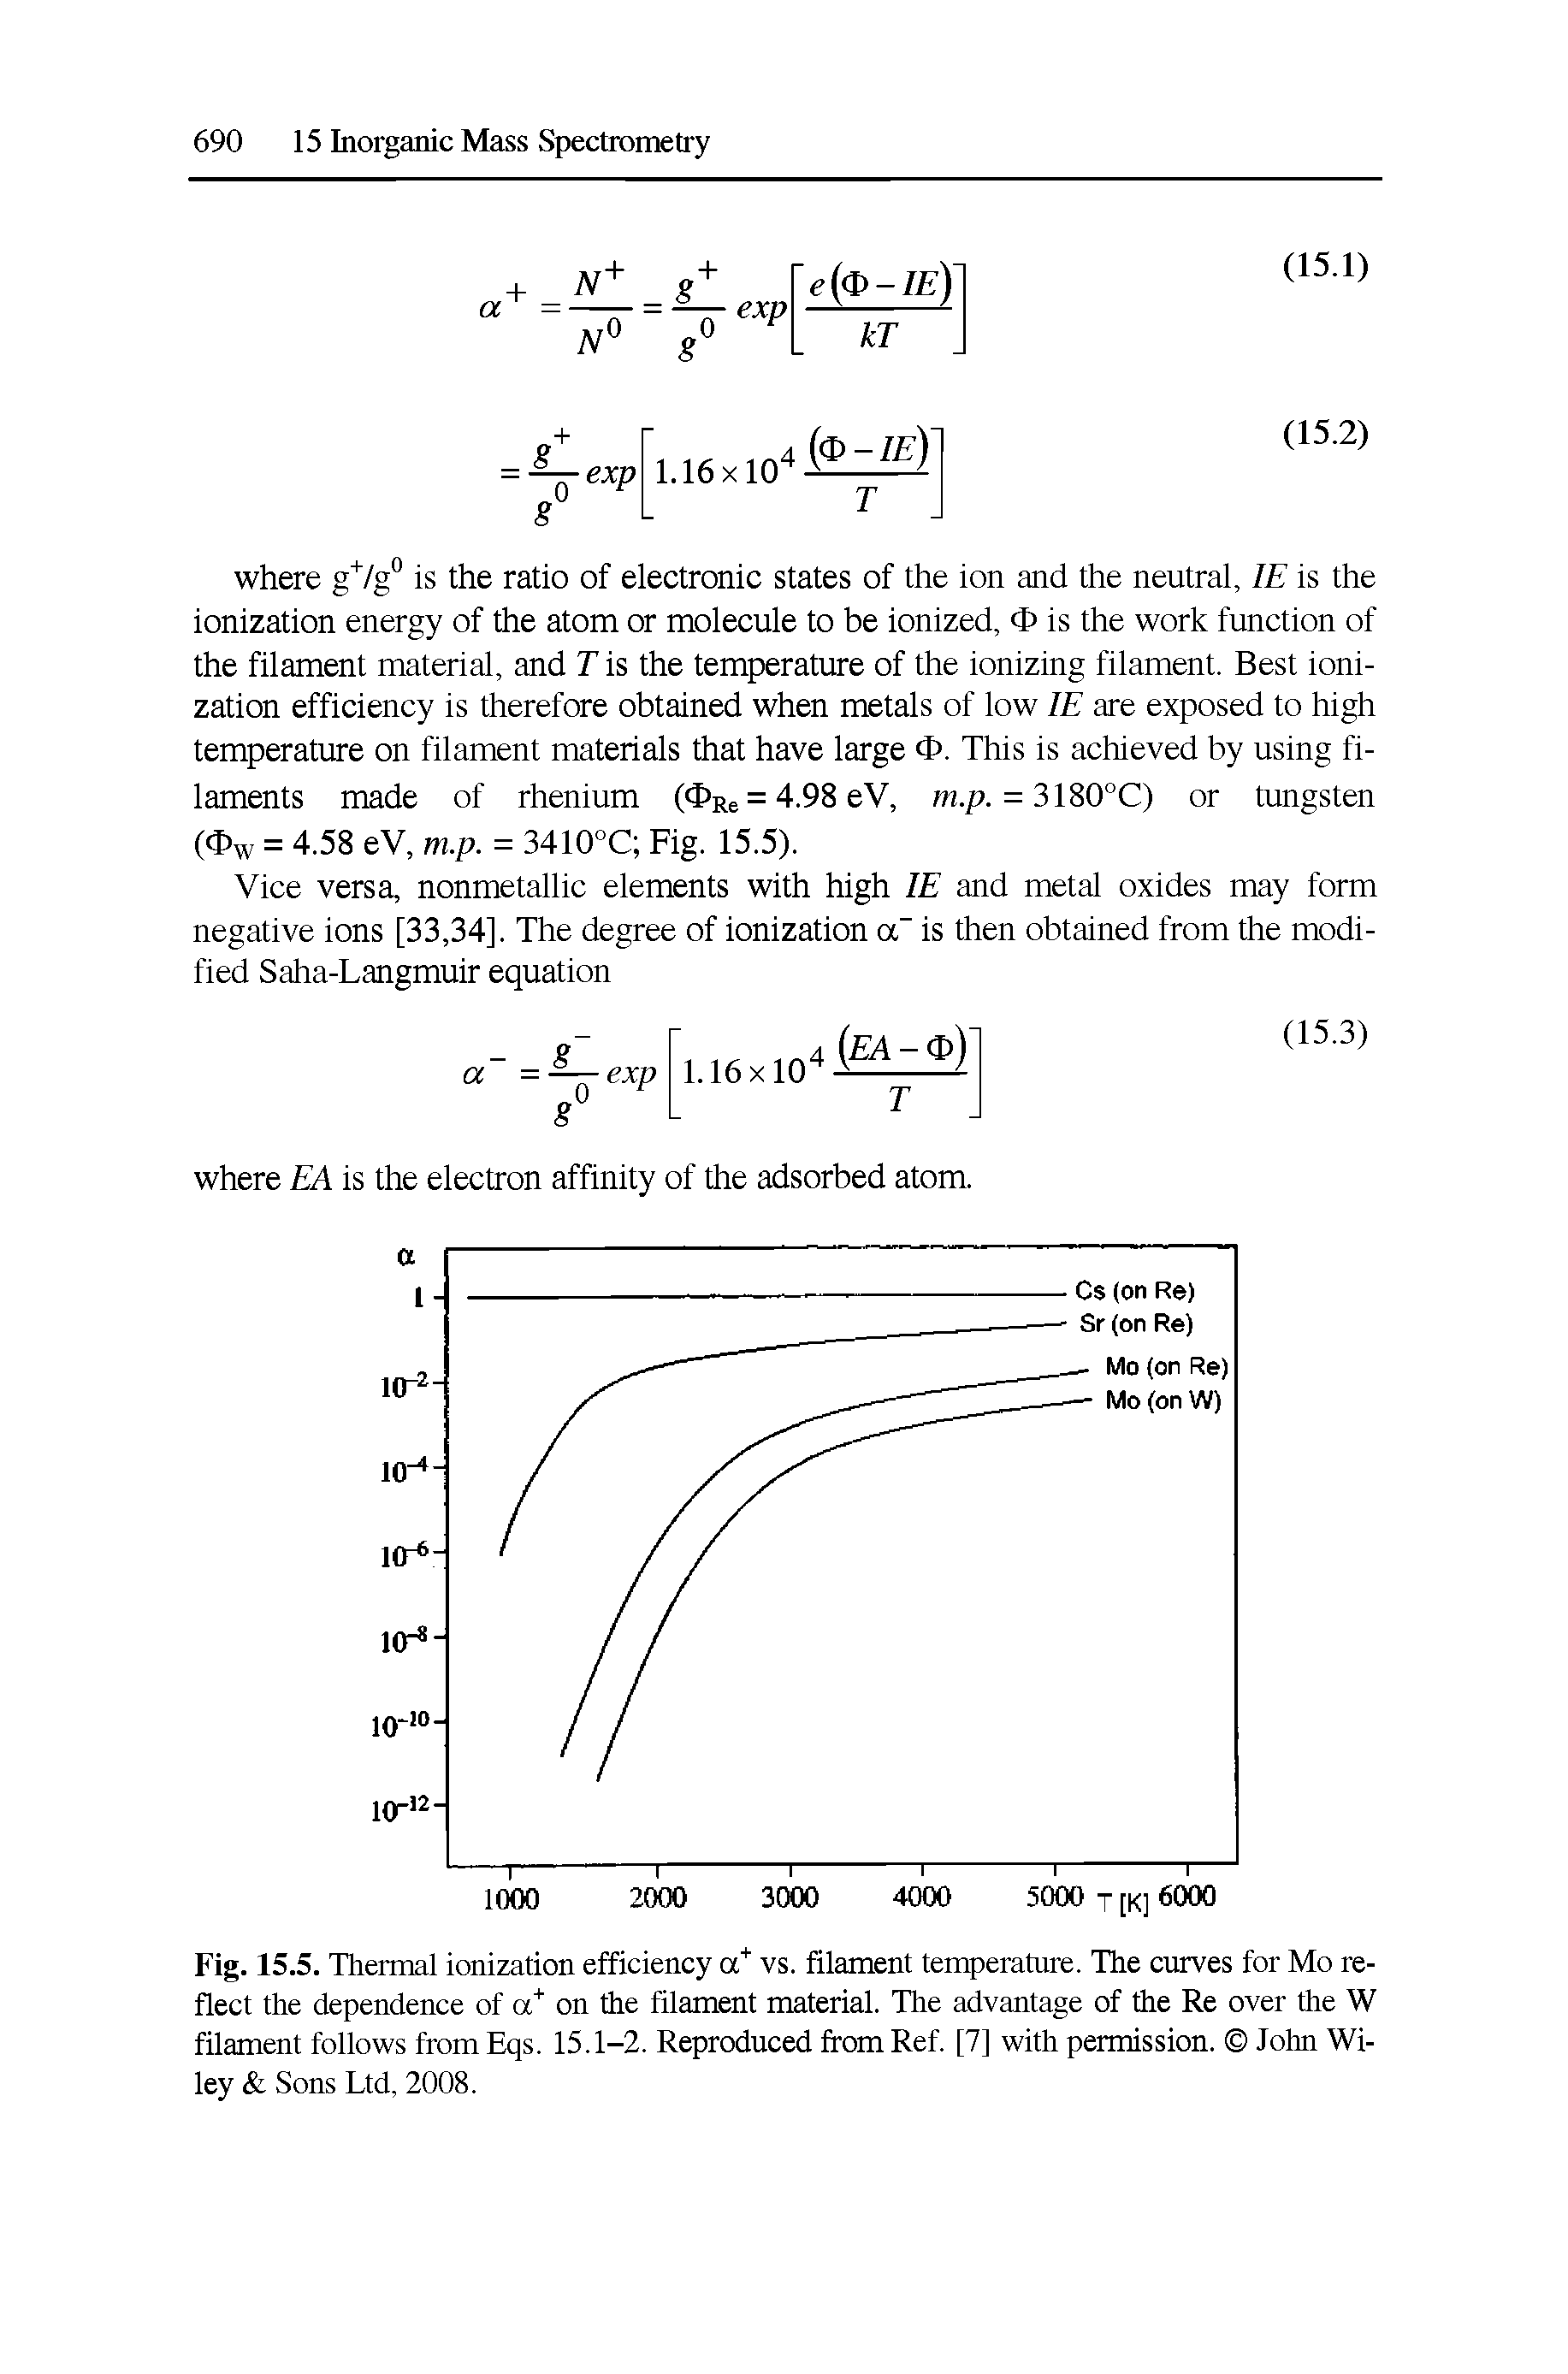 Fig. 15.5. Thermal ionization efficiency a vs. filament temperature. The curves for Mo reflect the dependence of a on the filament material. The advantage of the Re over the W filament follows fromEqs. 15.1-2. Reproduced from Ref. [7] with permission. John Wiley Sons Ltd, 2008.